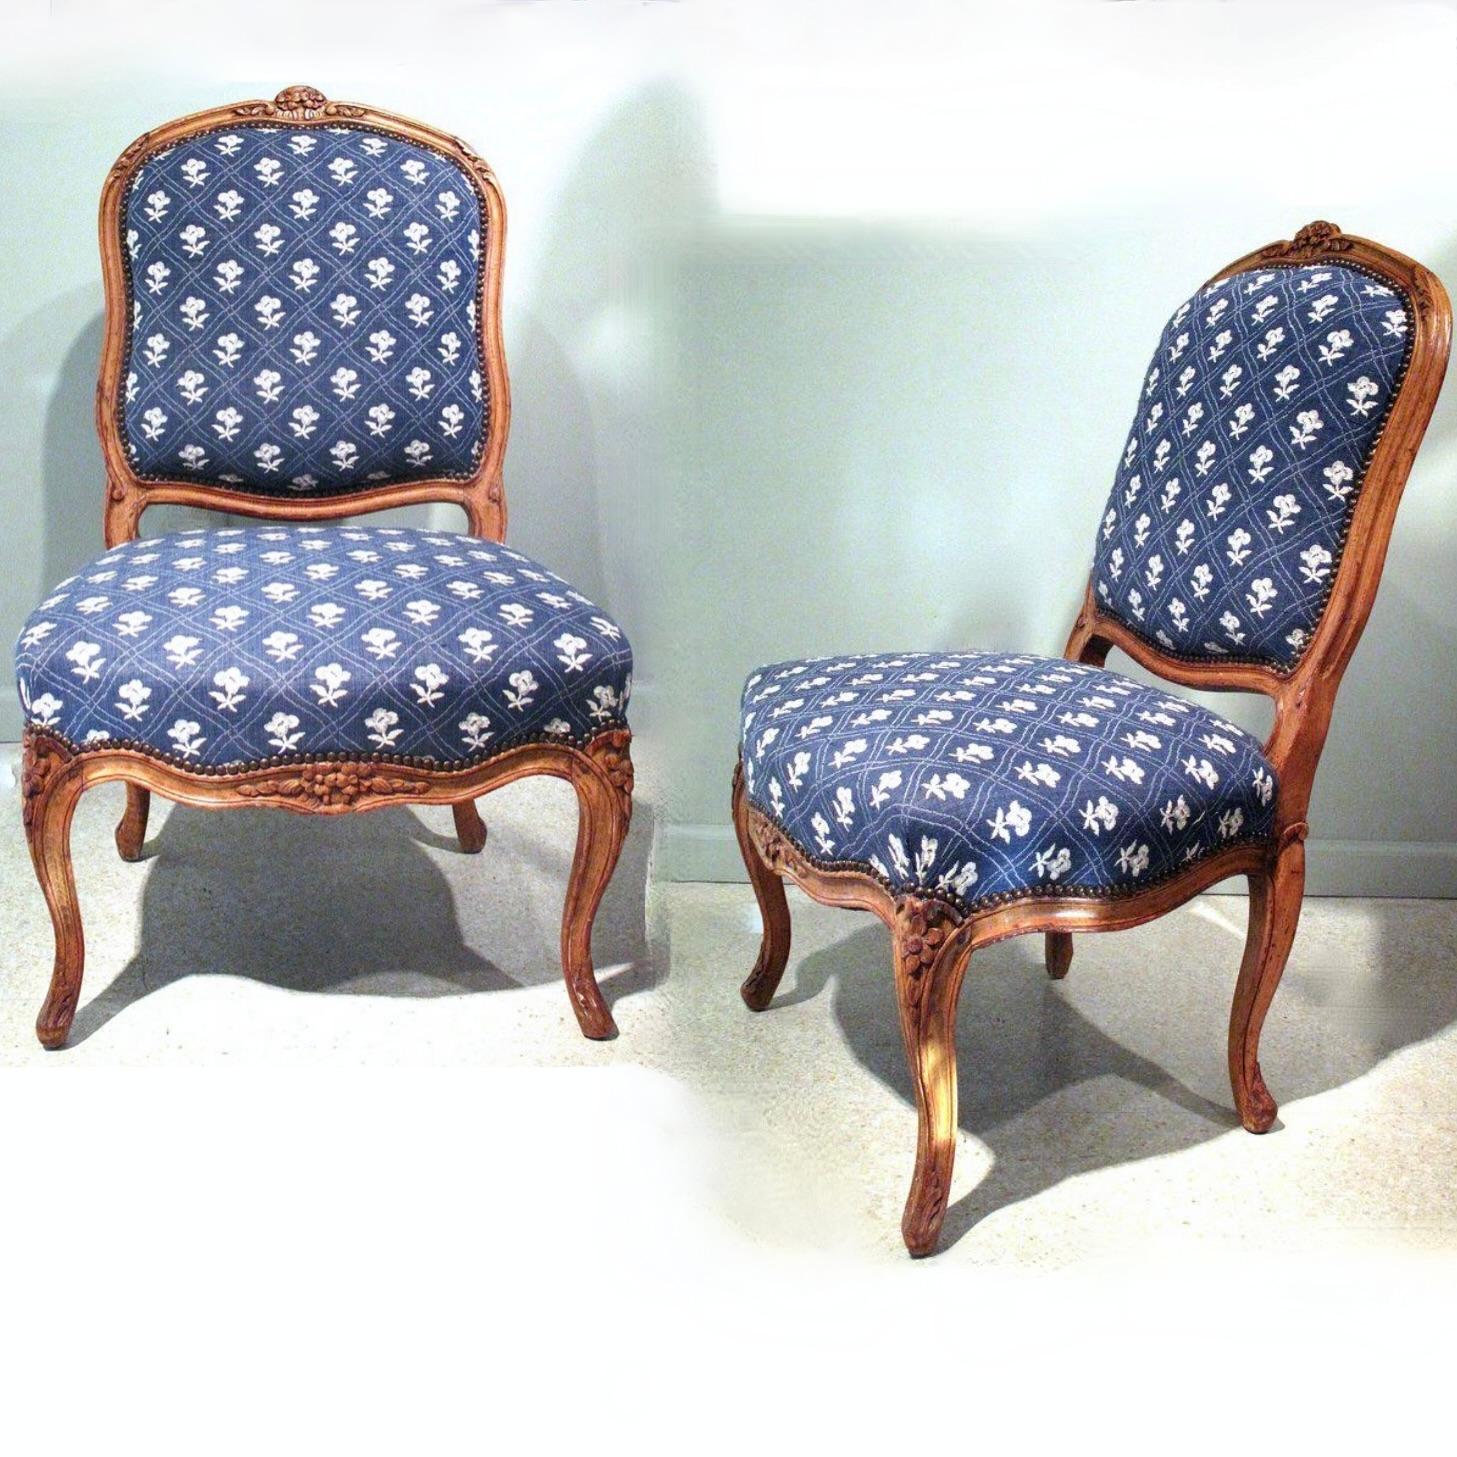 A pair of period mid 18th century French chairs, the natural beechwood frames of sturdy and comfortable proportions. Serpentine lines are well balanced throughout the back and seat, punctuated by traditional floral and foliate carving. In